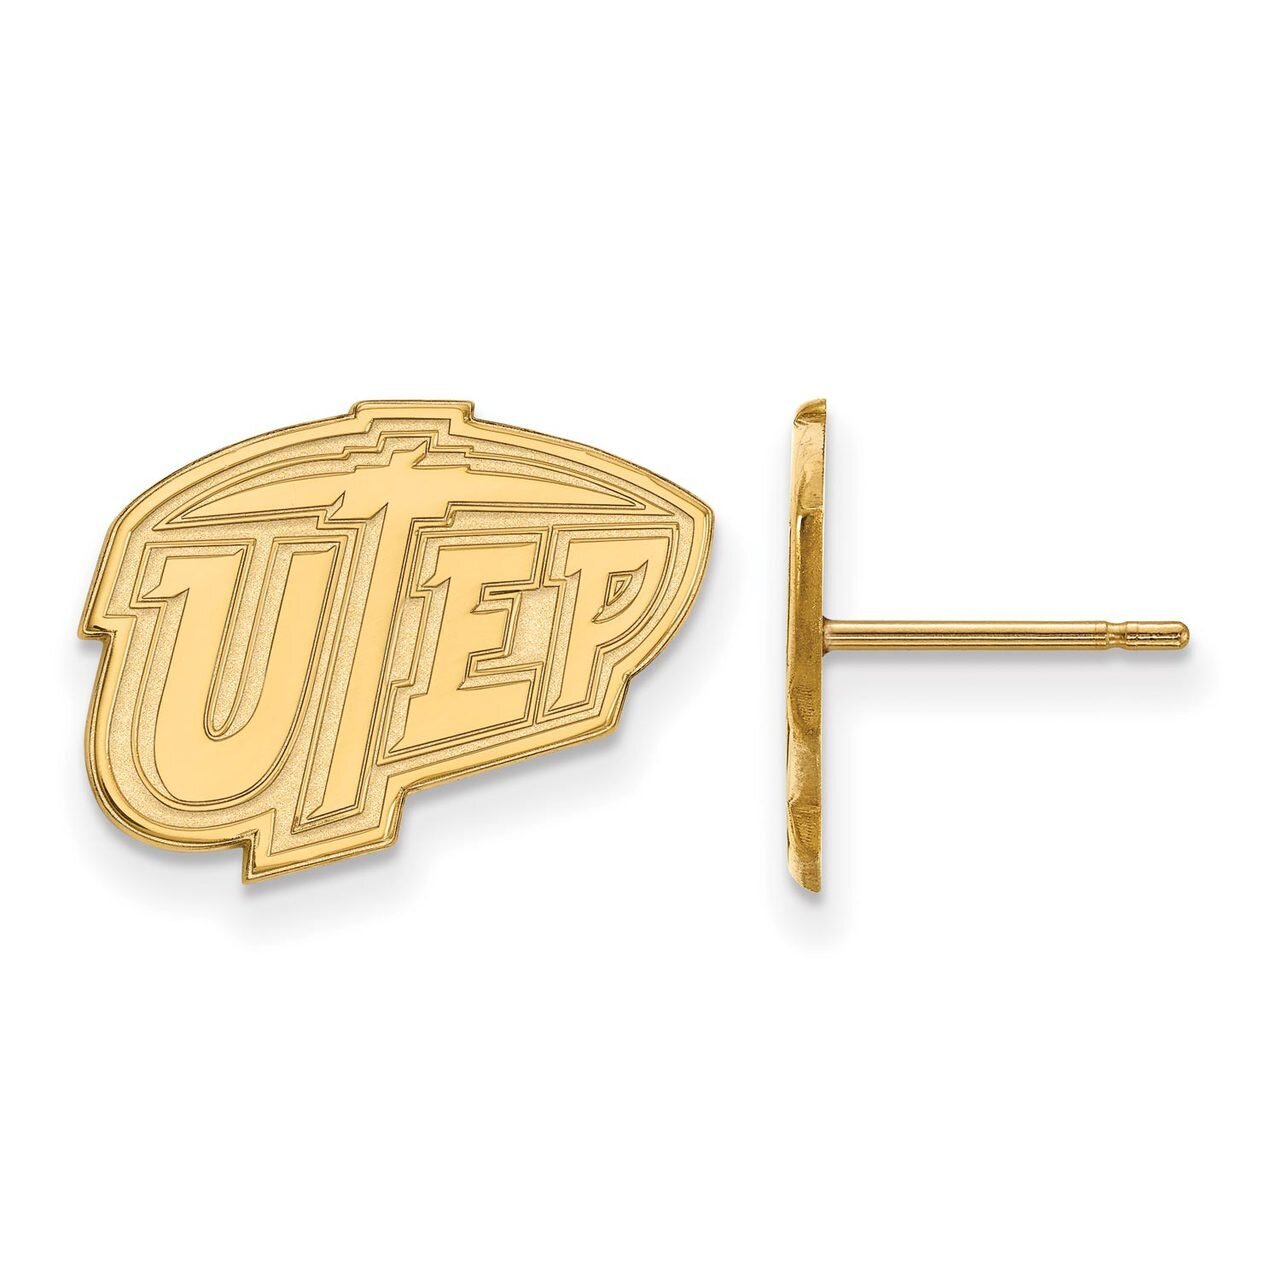 The University of Texas at El Paso Small Post Earring Gold-plated Silver GP004UTE